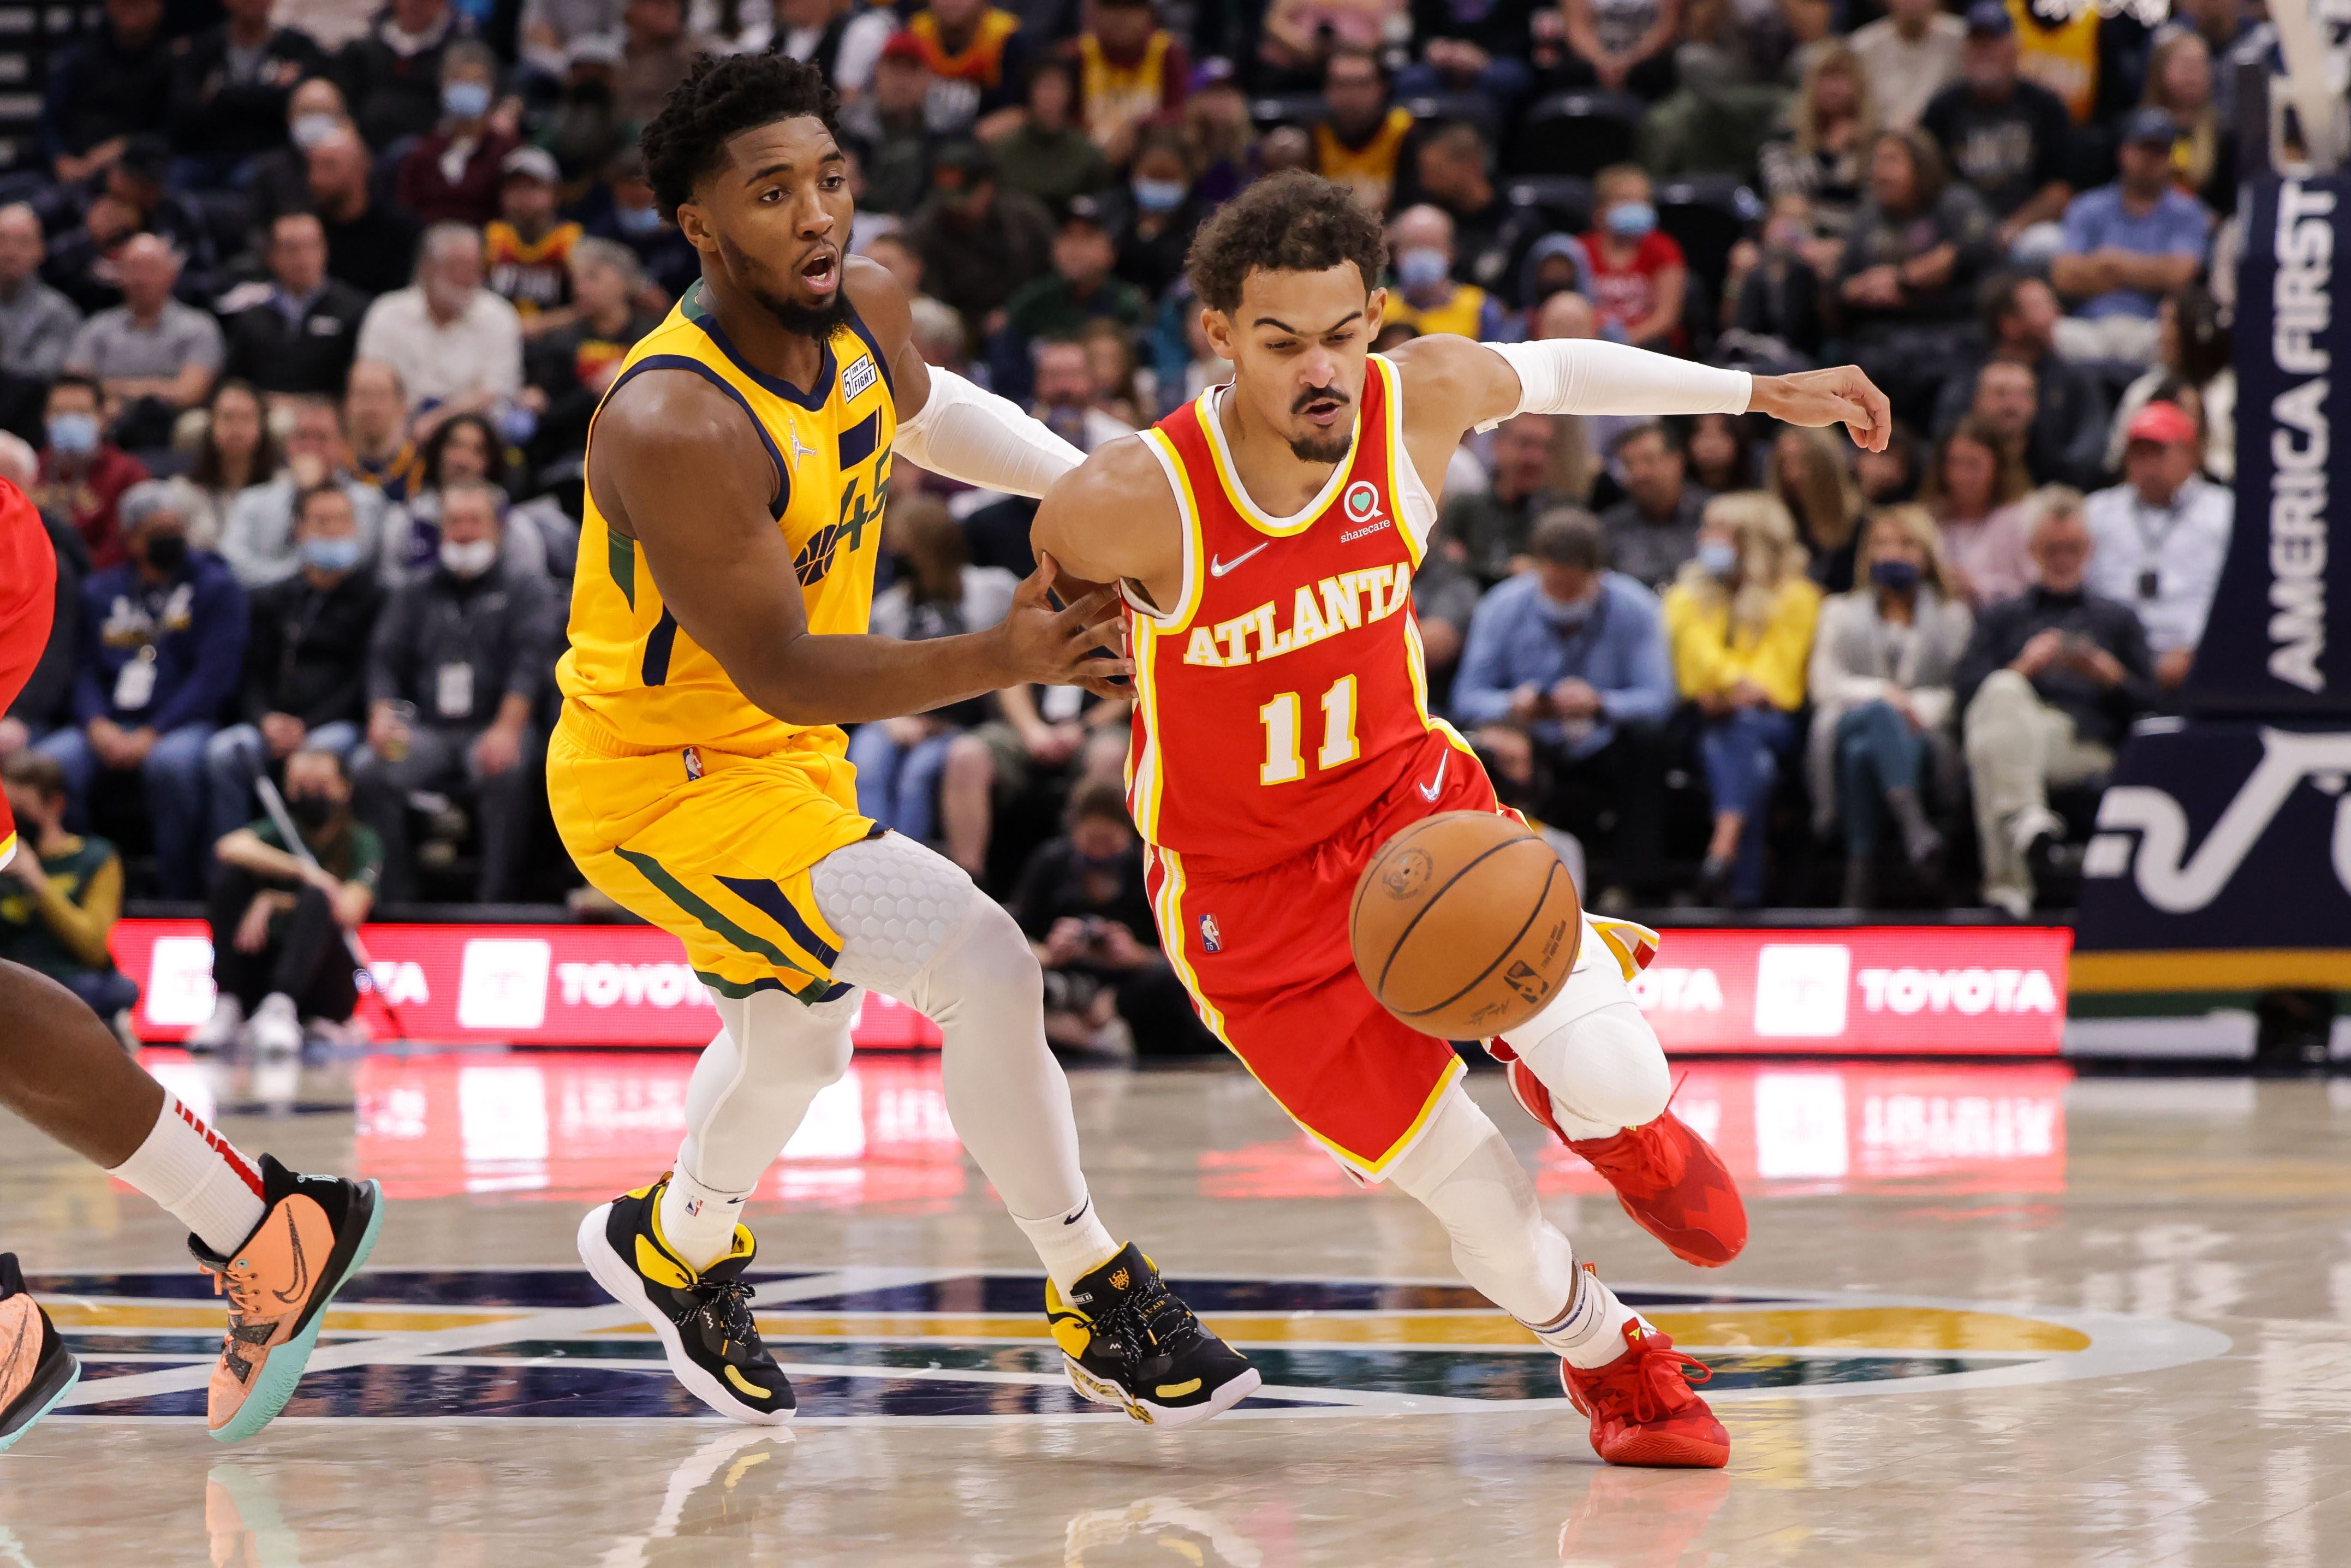 Donovan Mitchell fires 27 to lead Jazz over Hawks